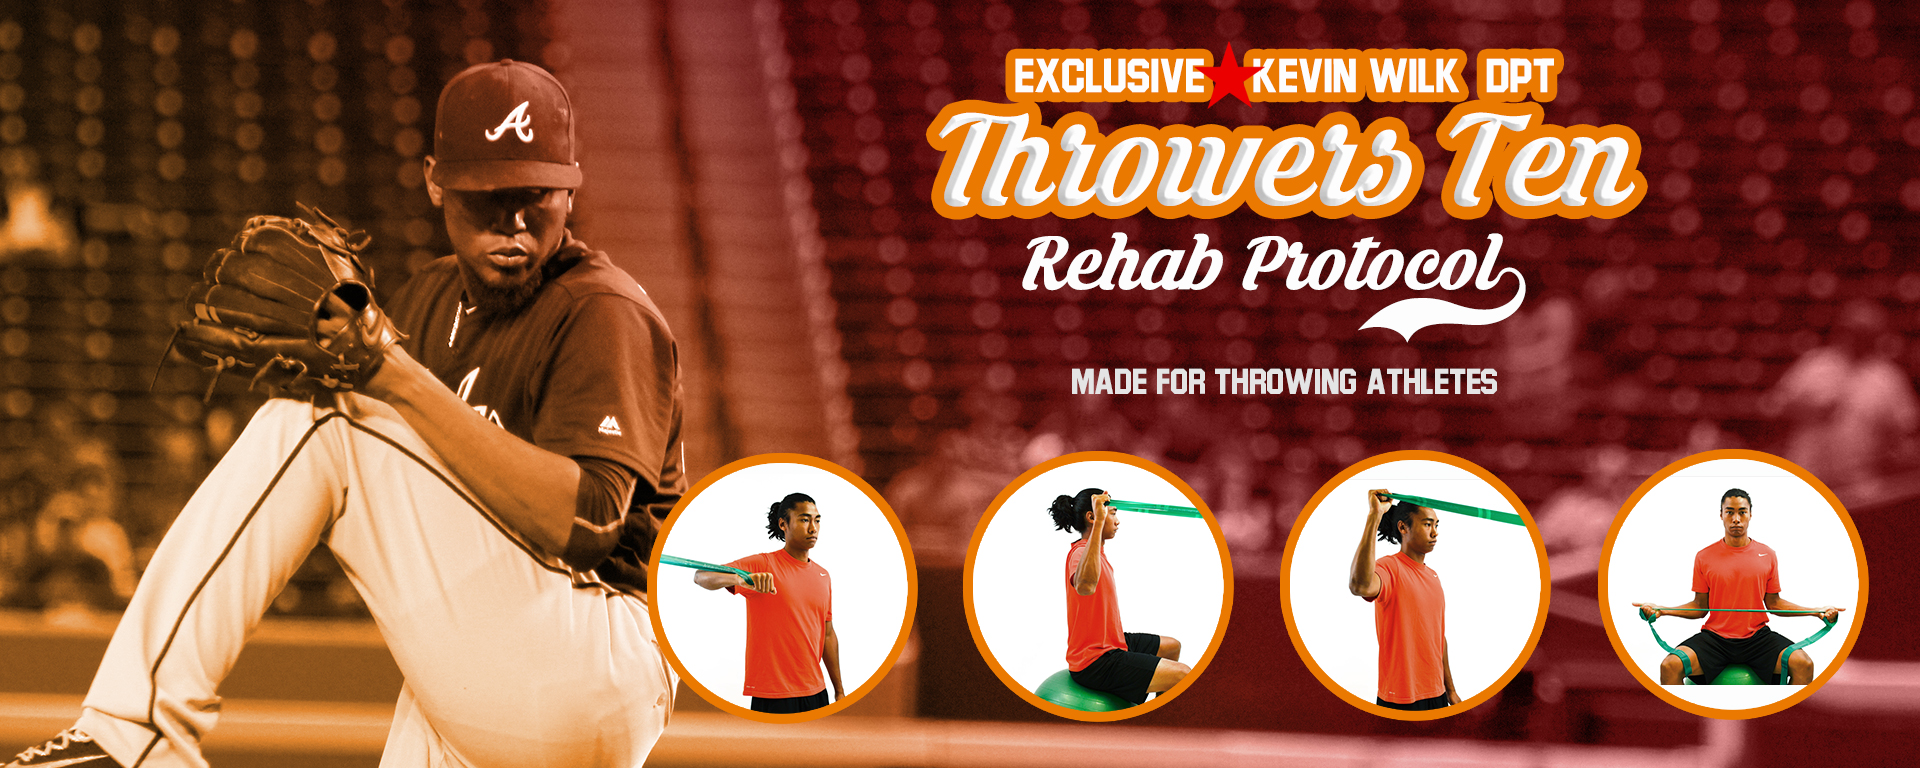 exculsive kevin wilk throwback ten rehab protocals